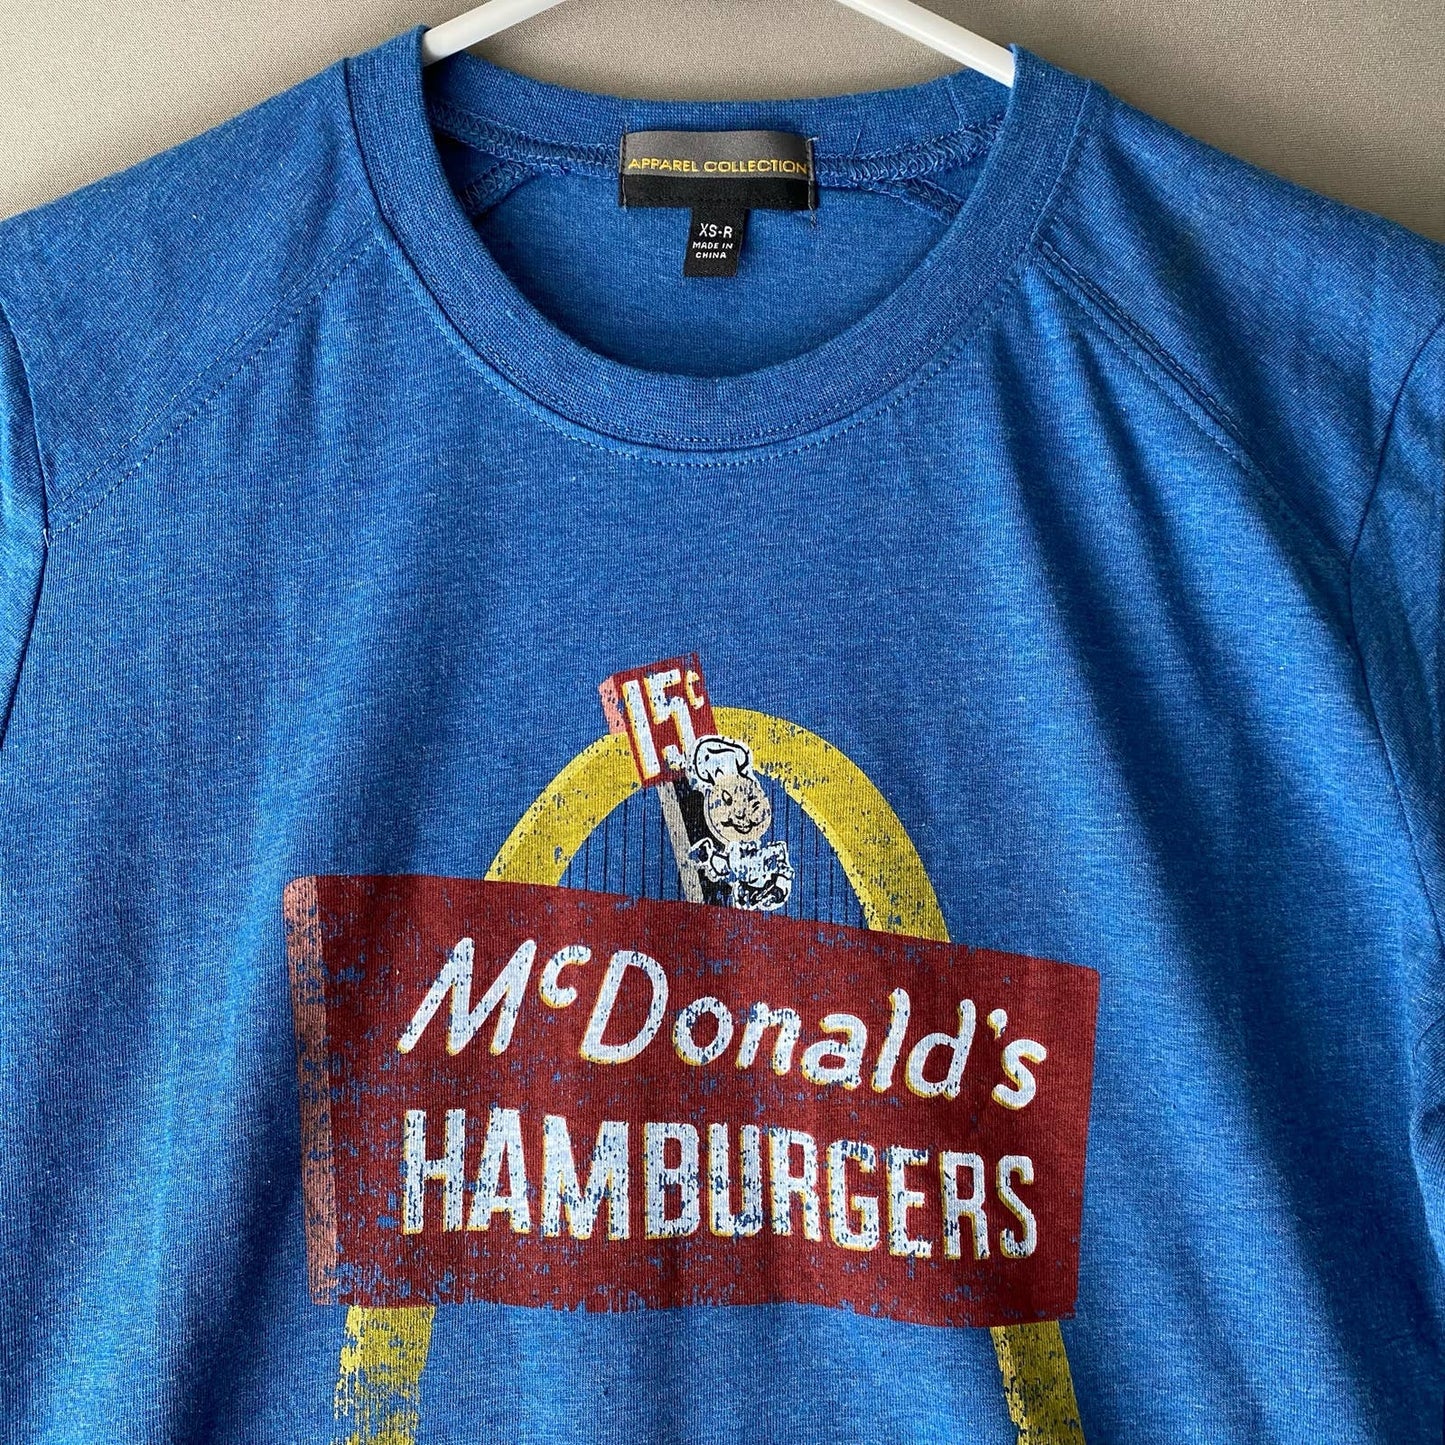 Apparel Collection McDonalds sz XS Vintage inspired T-shirt NWOT